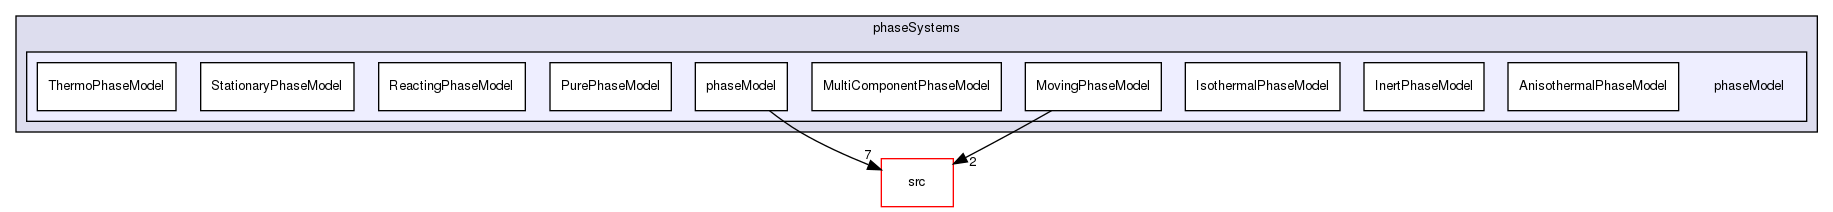 applications/solvers/multiphase/multiphaseEulerFoam/phaseSystems/phaseModel